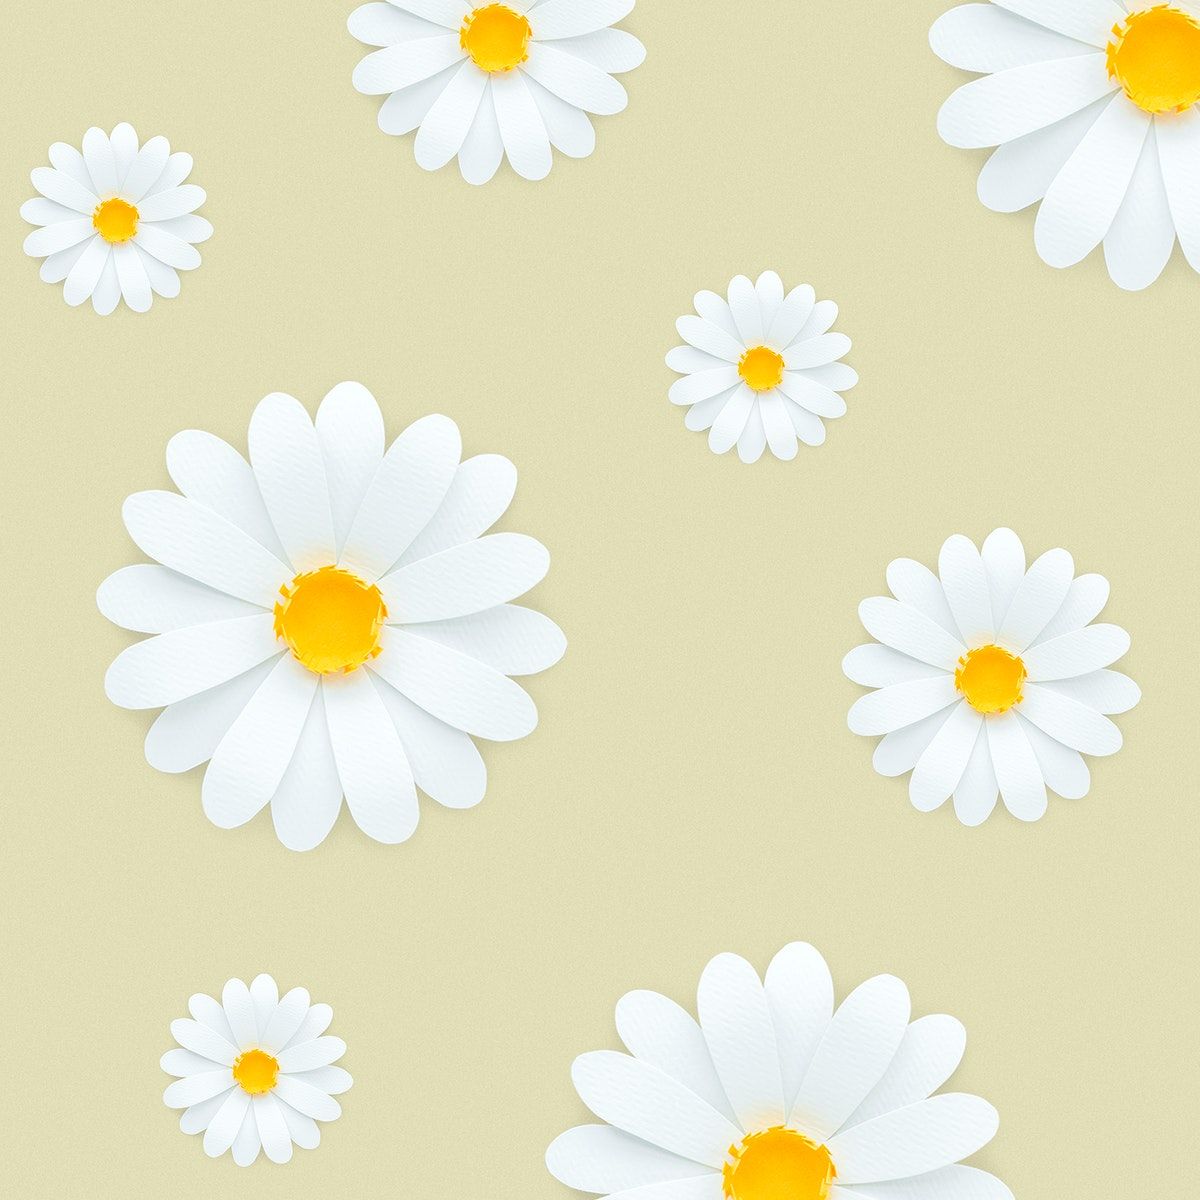 Download premium image of White daisy pattern on pale yellow background. Yellow background, Daisy wallpaper, Daisy painting